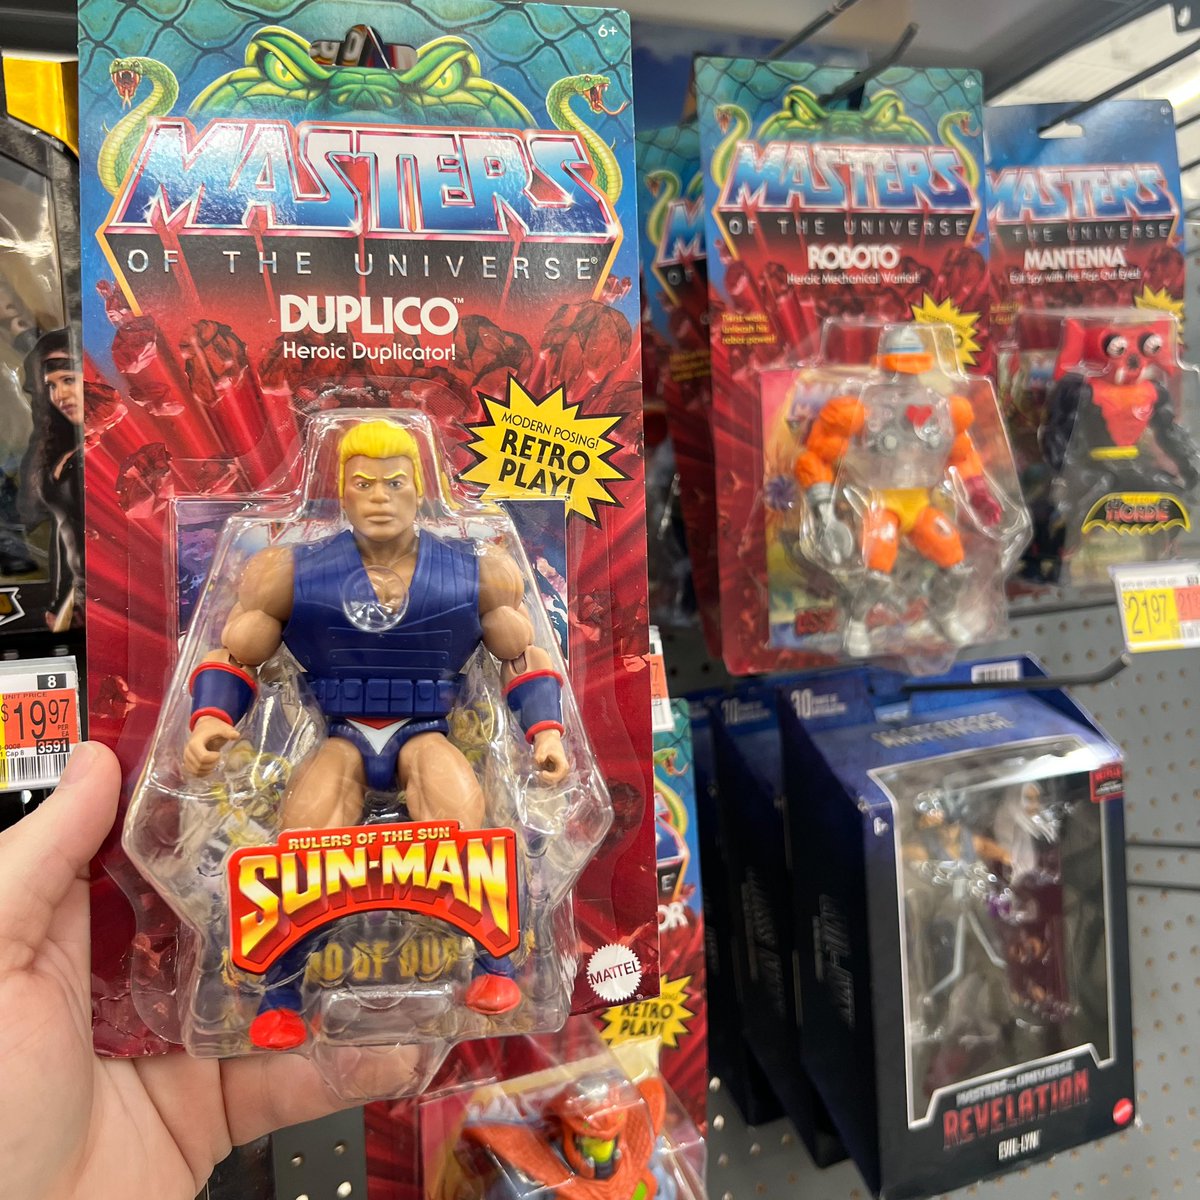 Came across MOTU Origins Duplico at the Walmart on HWY 64 in Tyler, Texas. He’s out there! #motu #motuorigins #mastersoftheuniverse #rulersofthesun #sunman